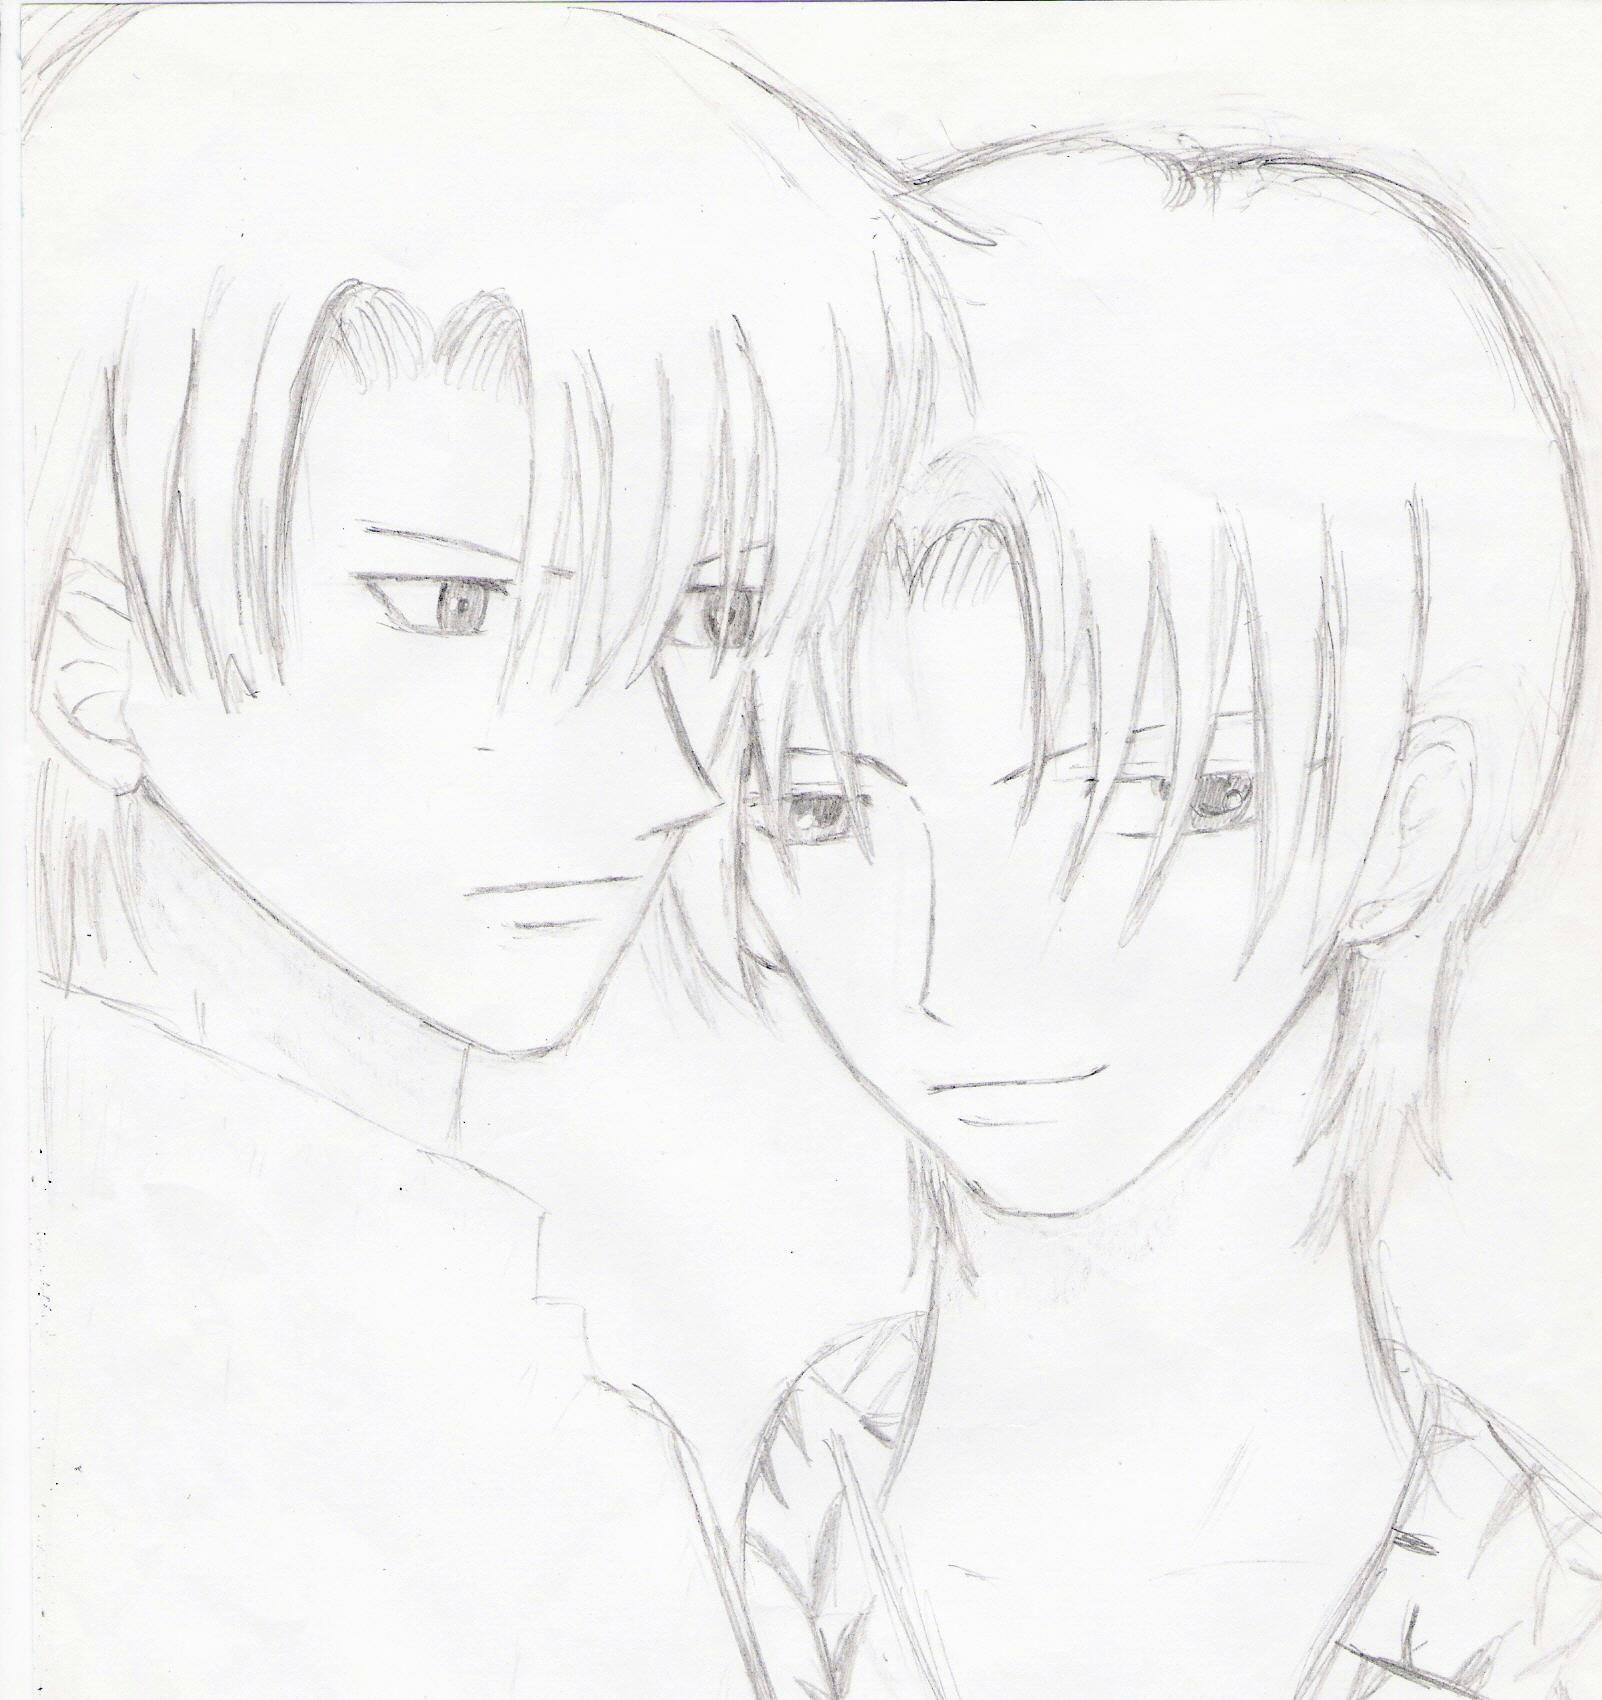 Shigure and Hatori(3rd of my portraits) by AngelKite